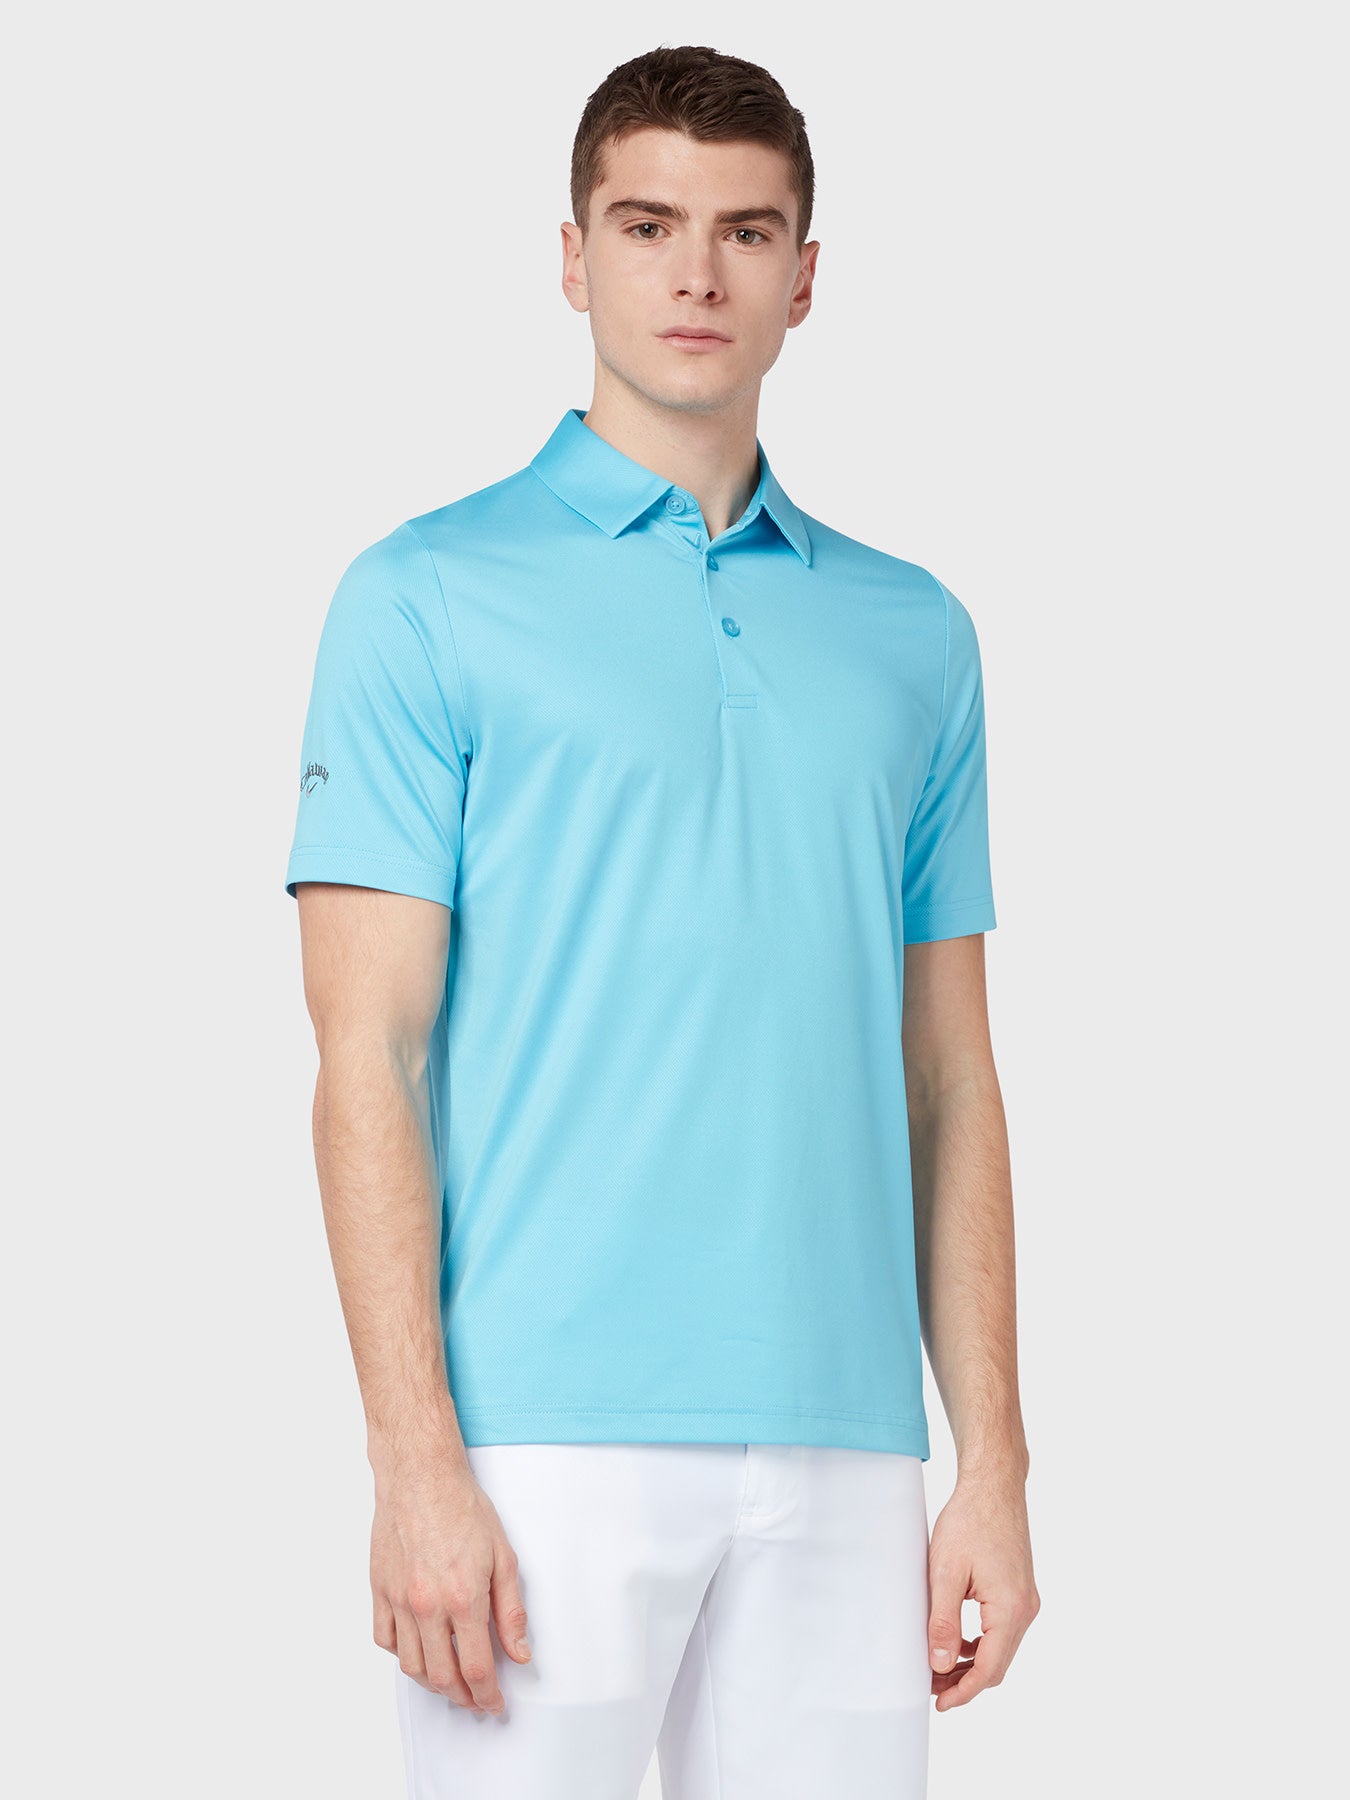 View Swing Tech Tour Polo In Blue Grotto Blue Grotto XXXL information